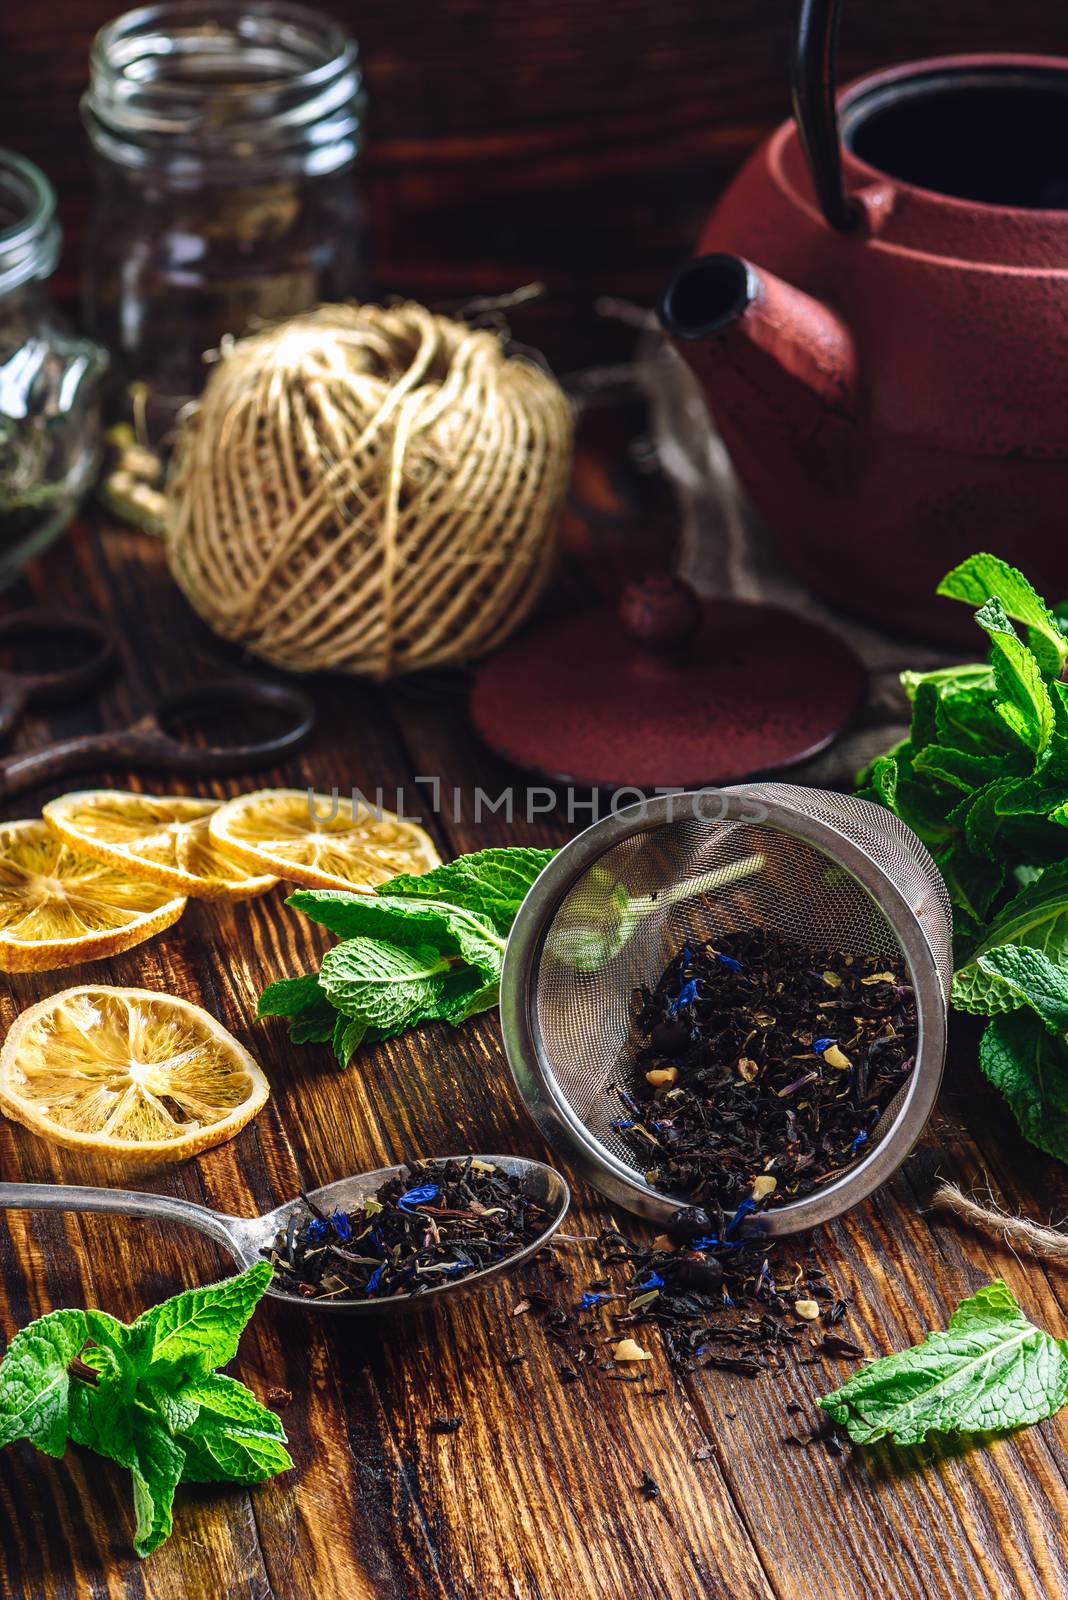 Dry Tea in Strainer and Spoon with Fresh Mint and Lemon Slices. Tangle with Two Jars and Teapot on Backdrop.